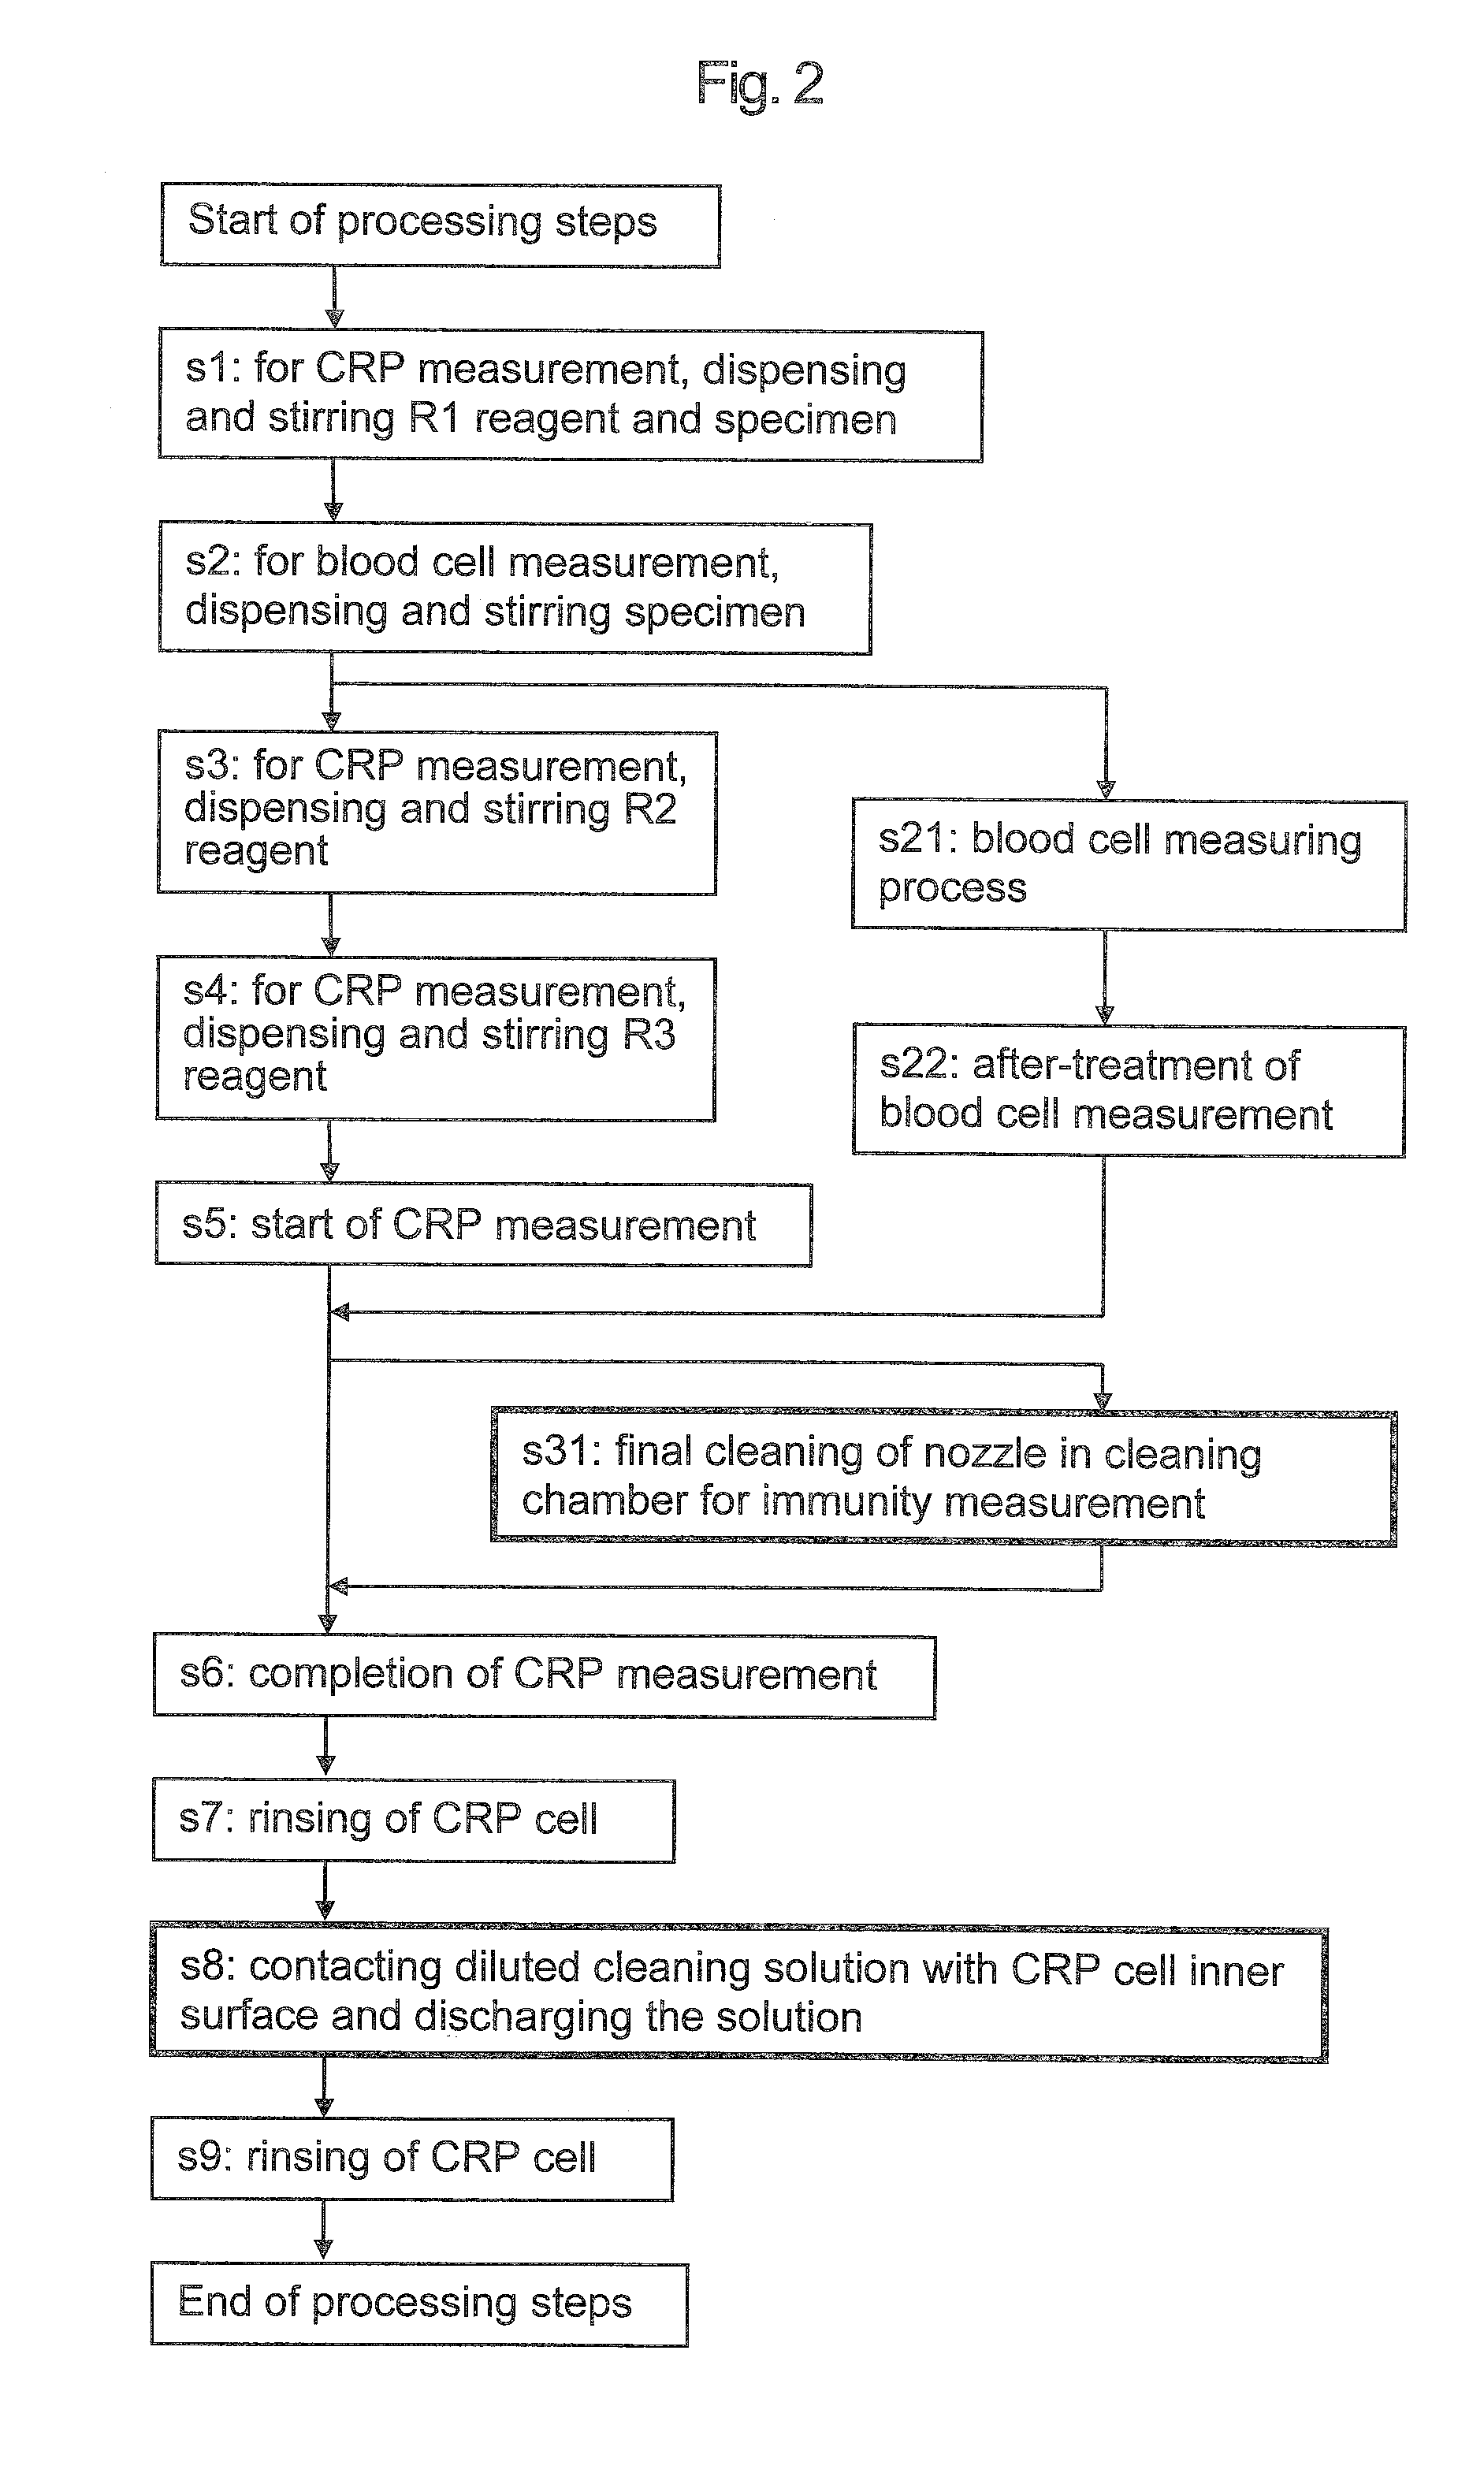 Apparatus for measuring blood cells and immunity from whole blood